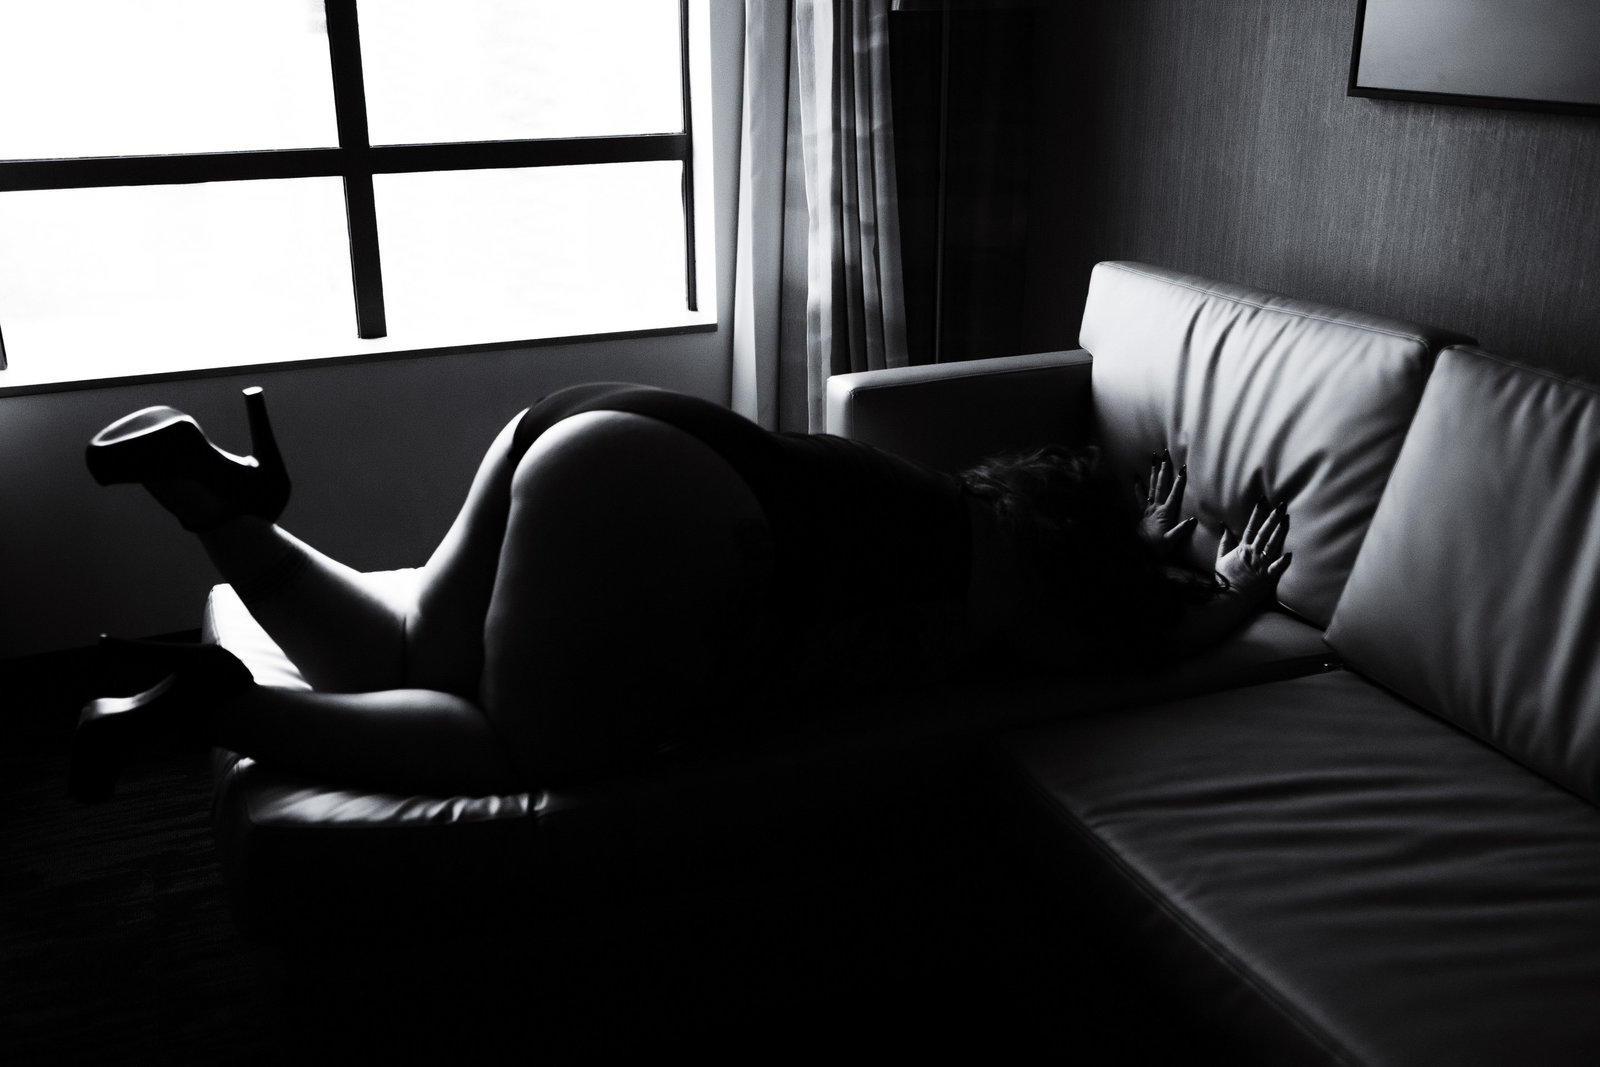 Someplace Images- San Diego Boudoir Photographer0005